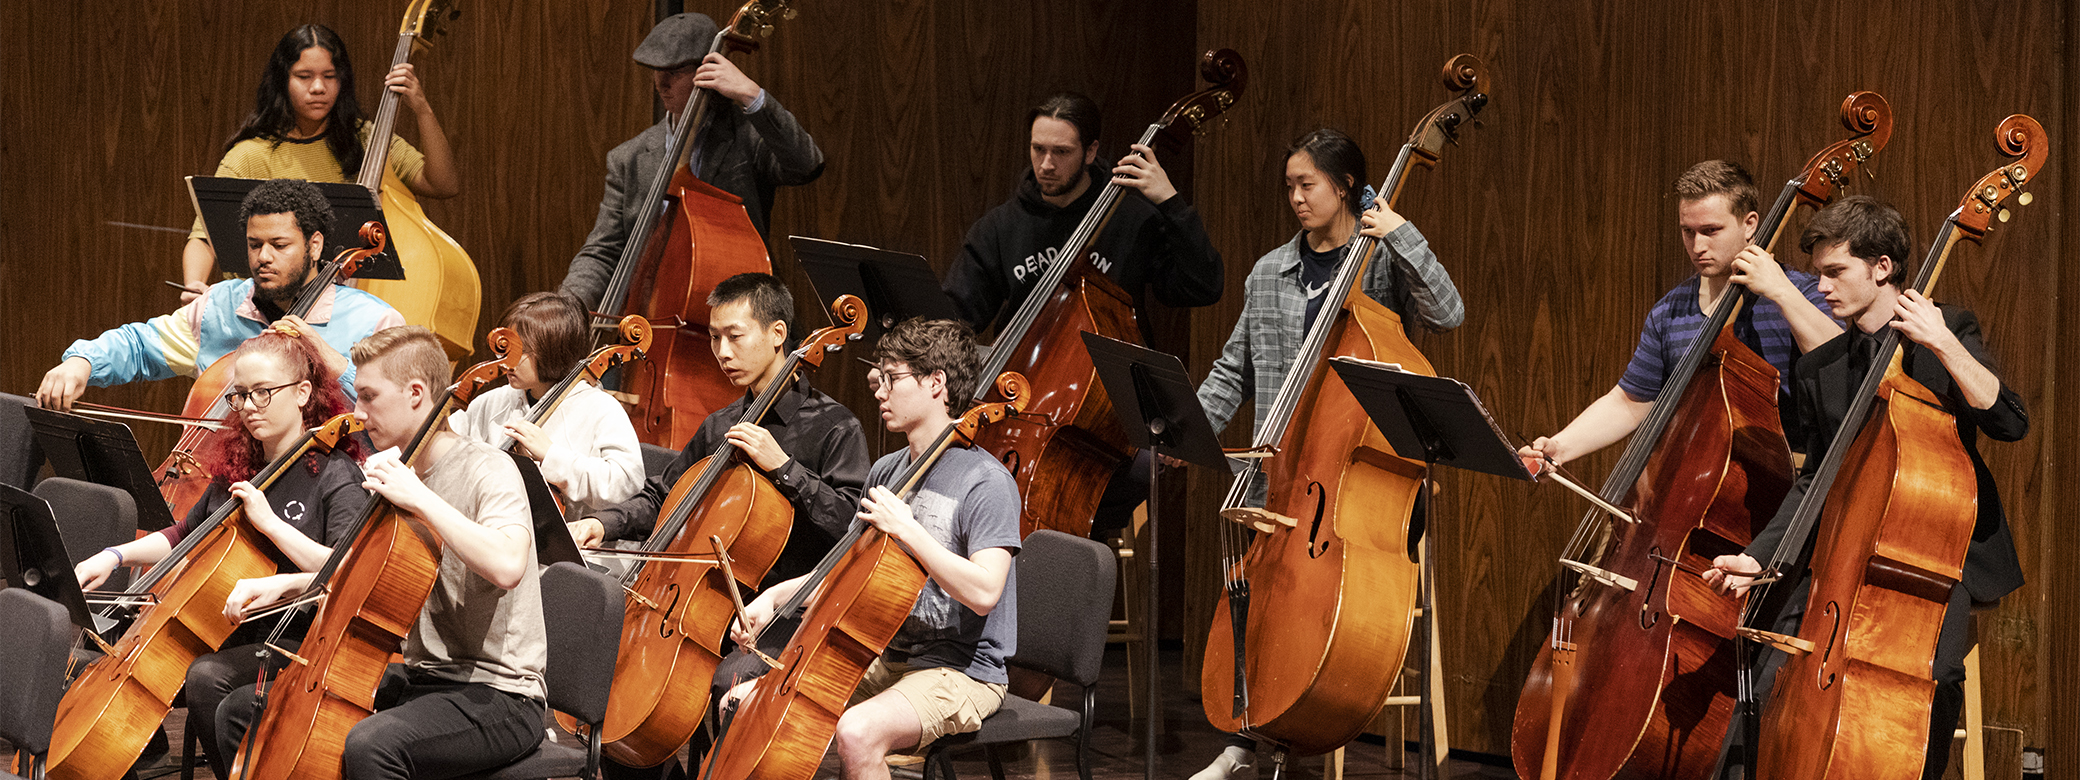 UW School of Music student orchestra performance focusing on students playing cellos.